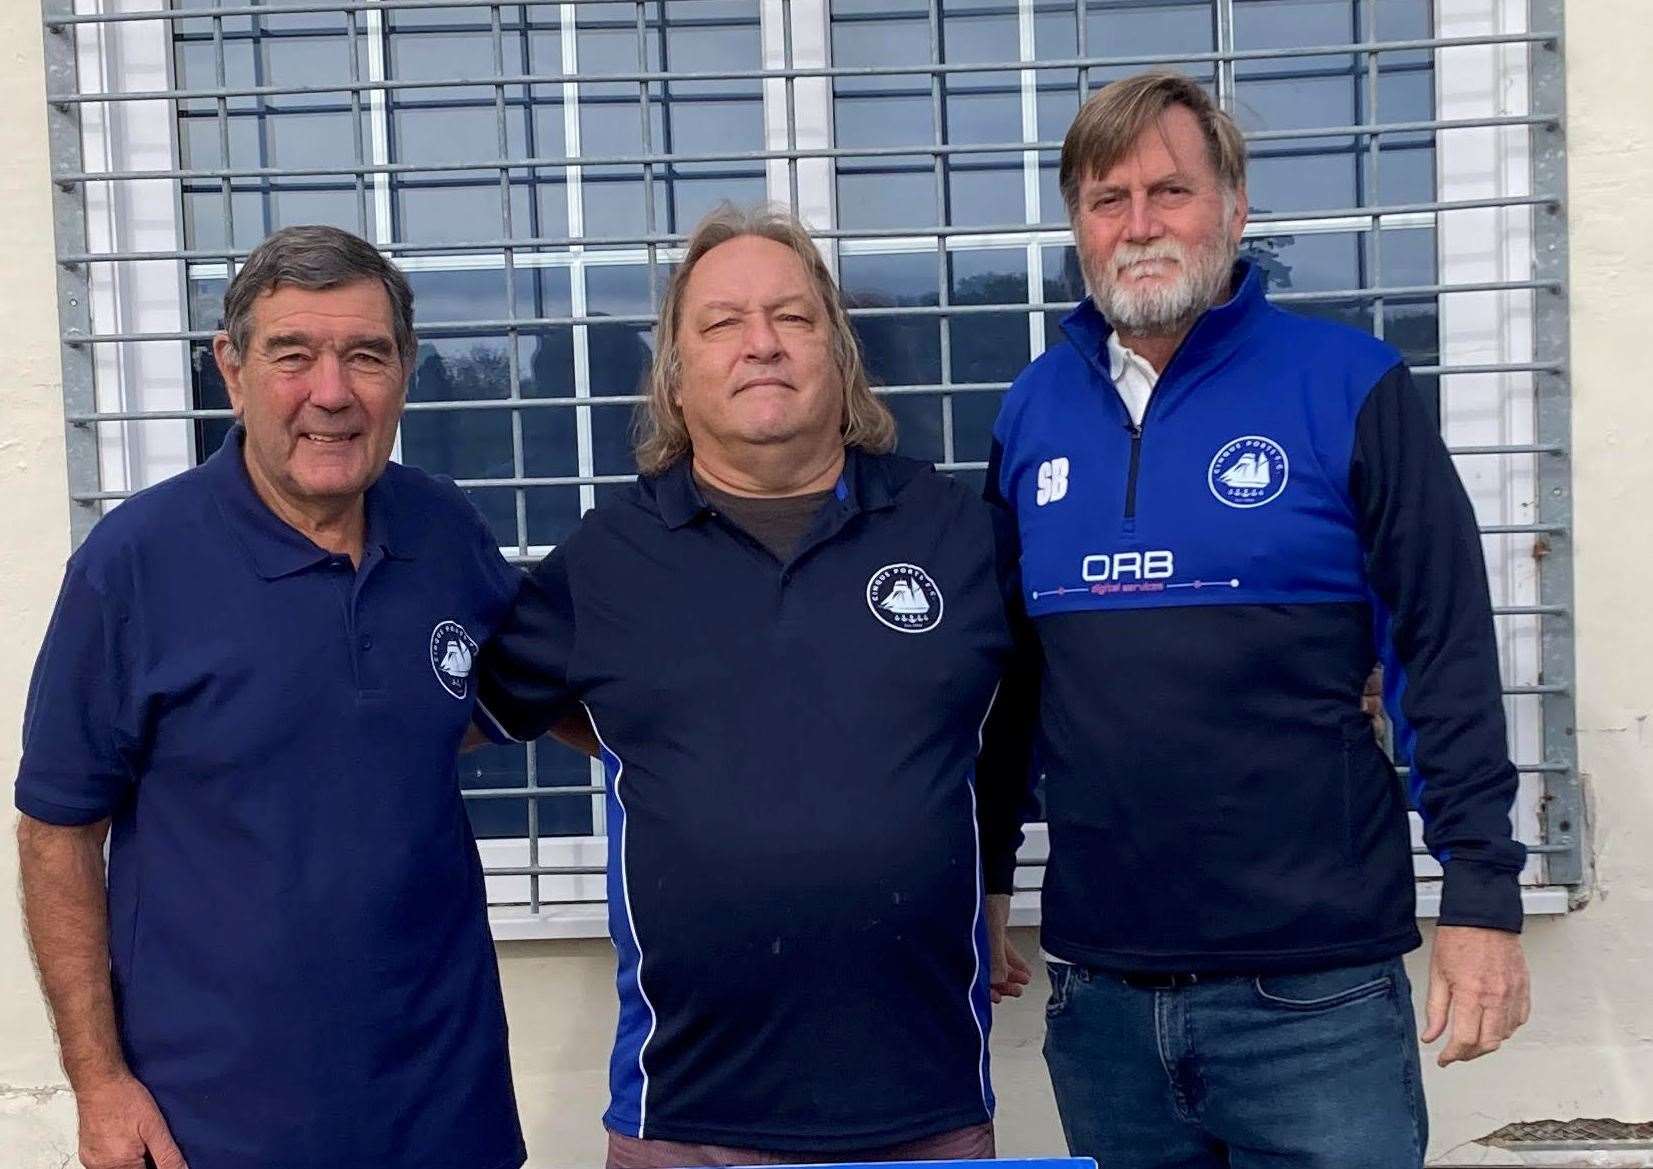 From left to right, Cinque Ports FC's club president Bob Chivington, club secretary Peter Davies and chairman Steve Bowers